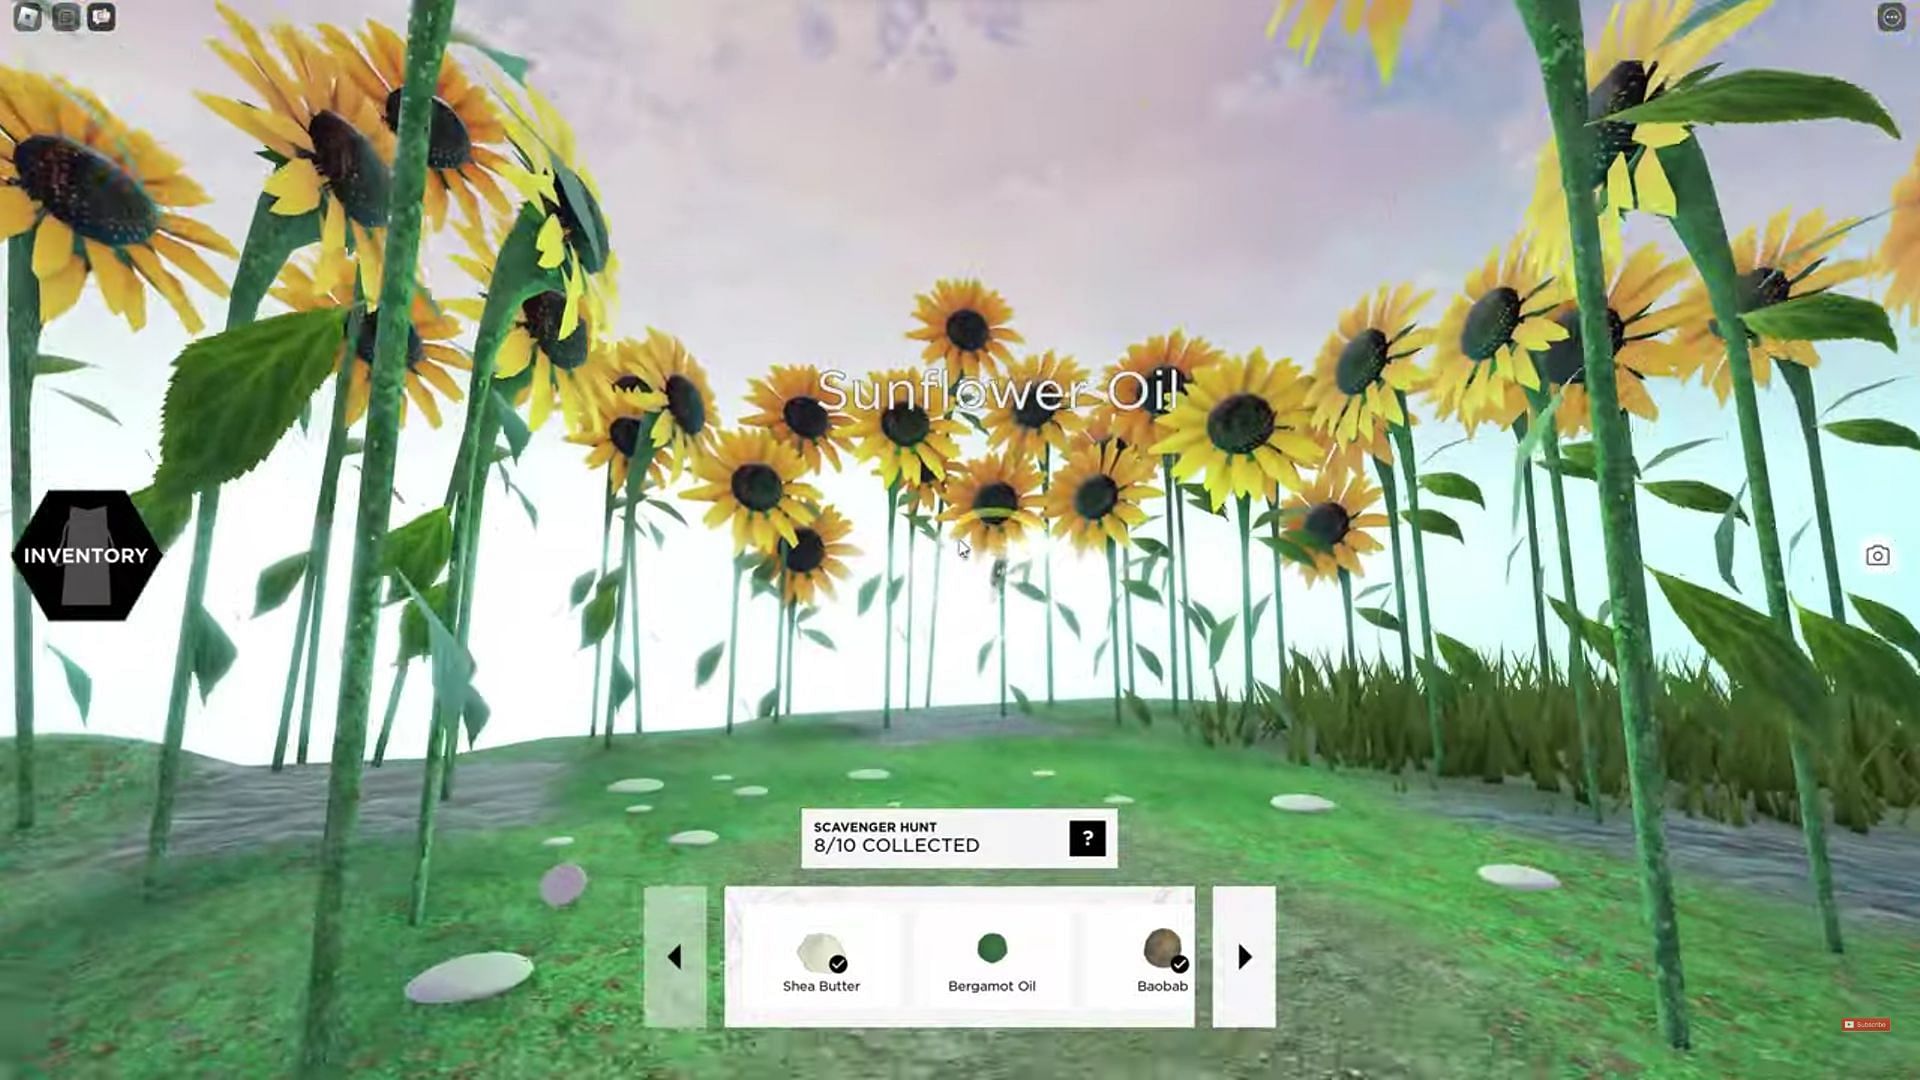 Sunflower ingredient at the end of the farm (Image via Conor3D/YouTube)